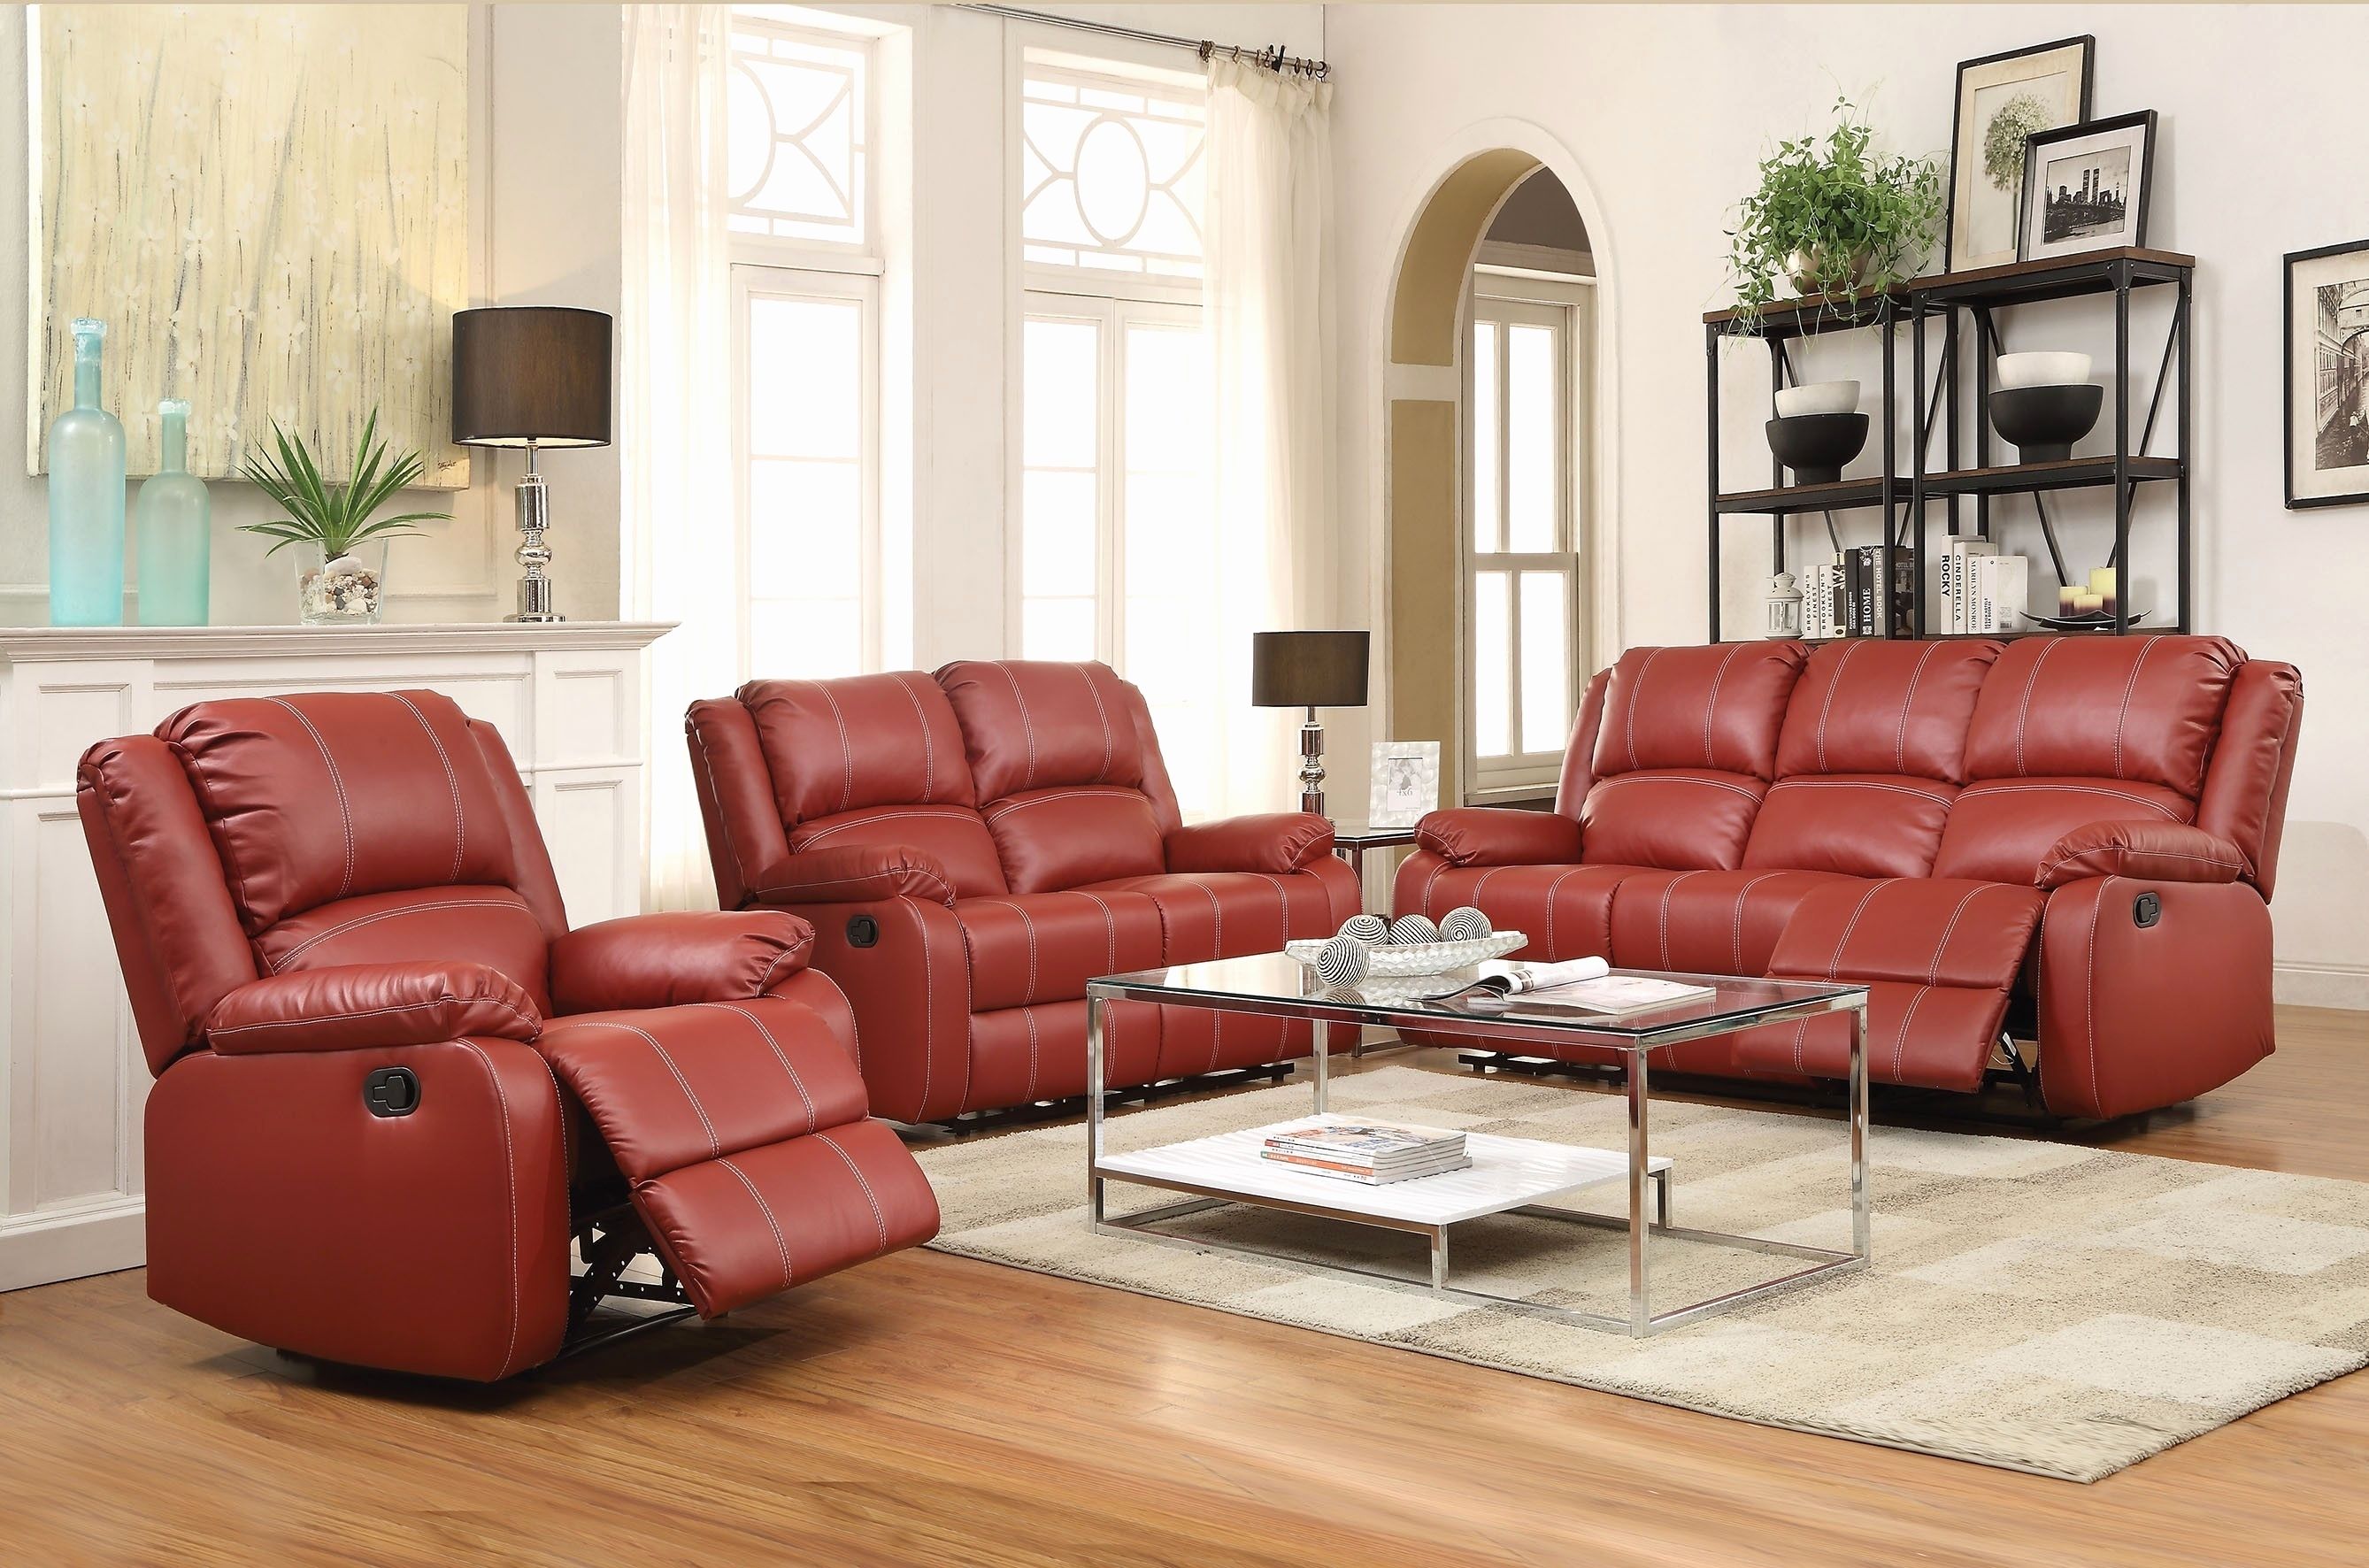 Red Leather Reclining Sofa And Loveseat | Ezhandui With Regard To Red Leather Reclining Sofas And Loveseats (Photo 13 of 15)